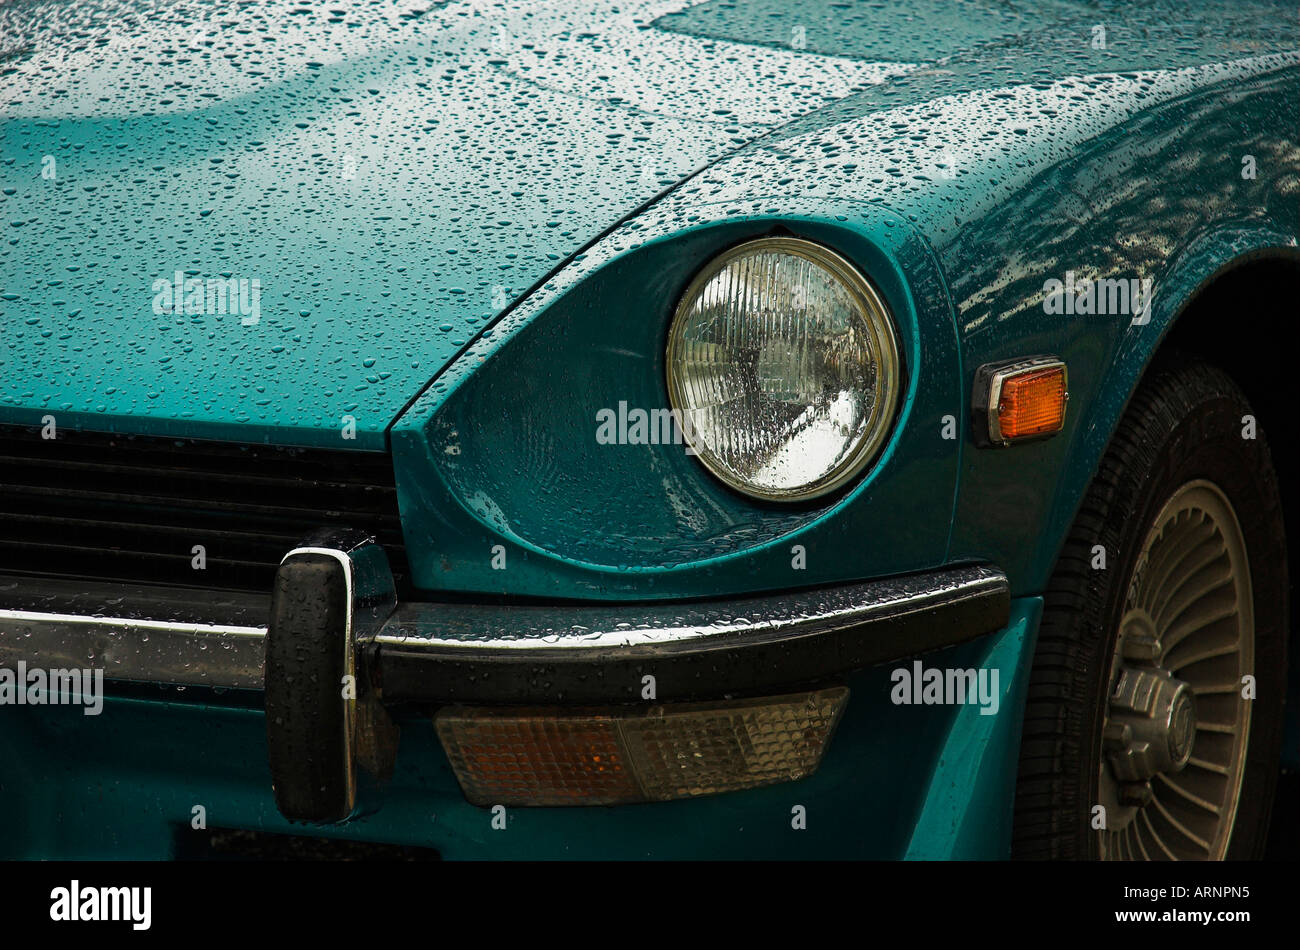 Datsun 240Z classic car detail .Paintwork is glistening after recent rain Stock Photo